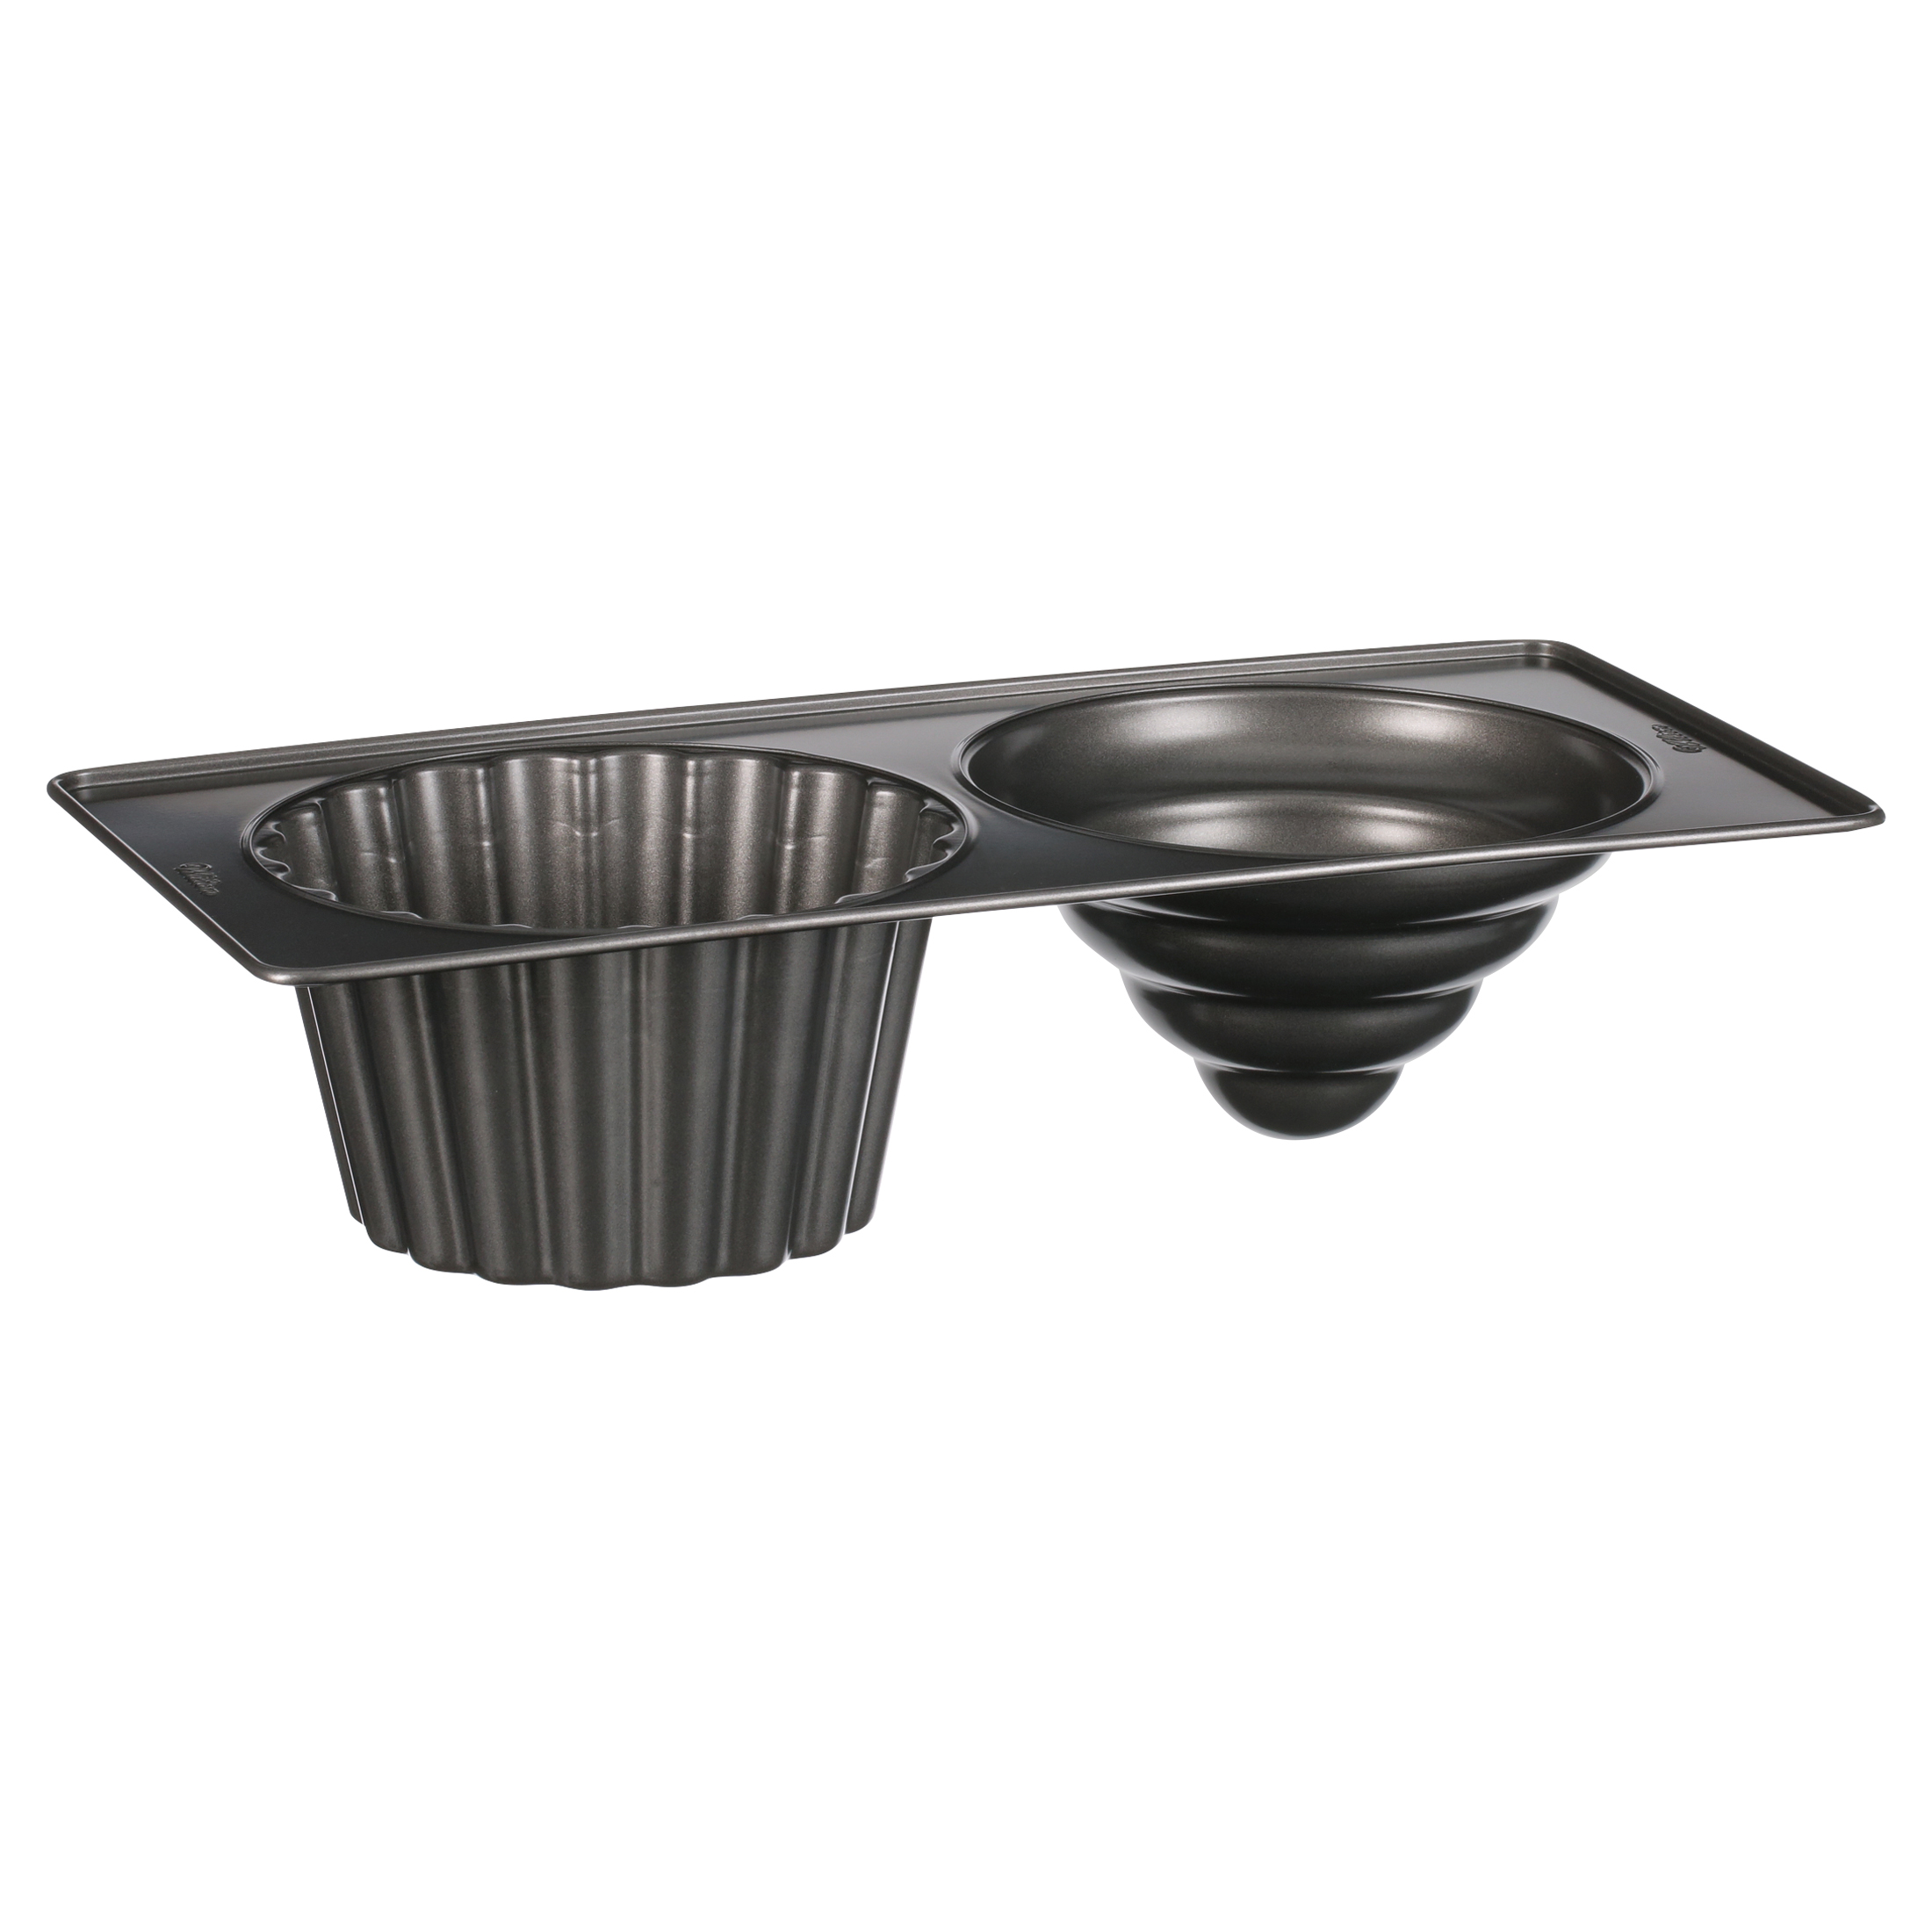  Wilton Giant Dimensions Large Cupcake PAN: Novelty Cake Pans:  Home & Kitchen